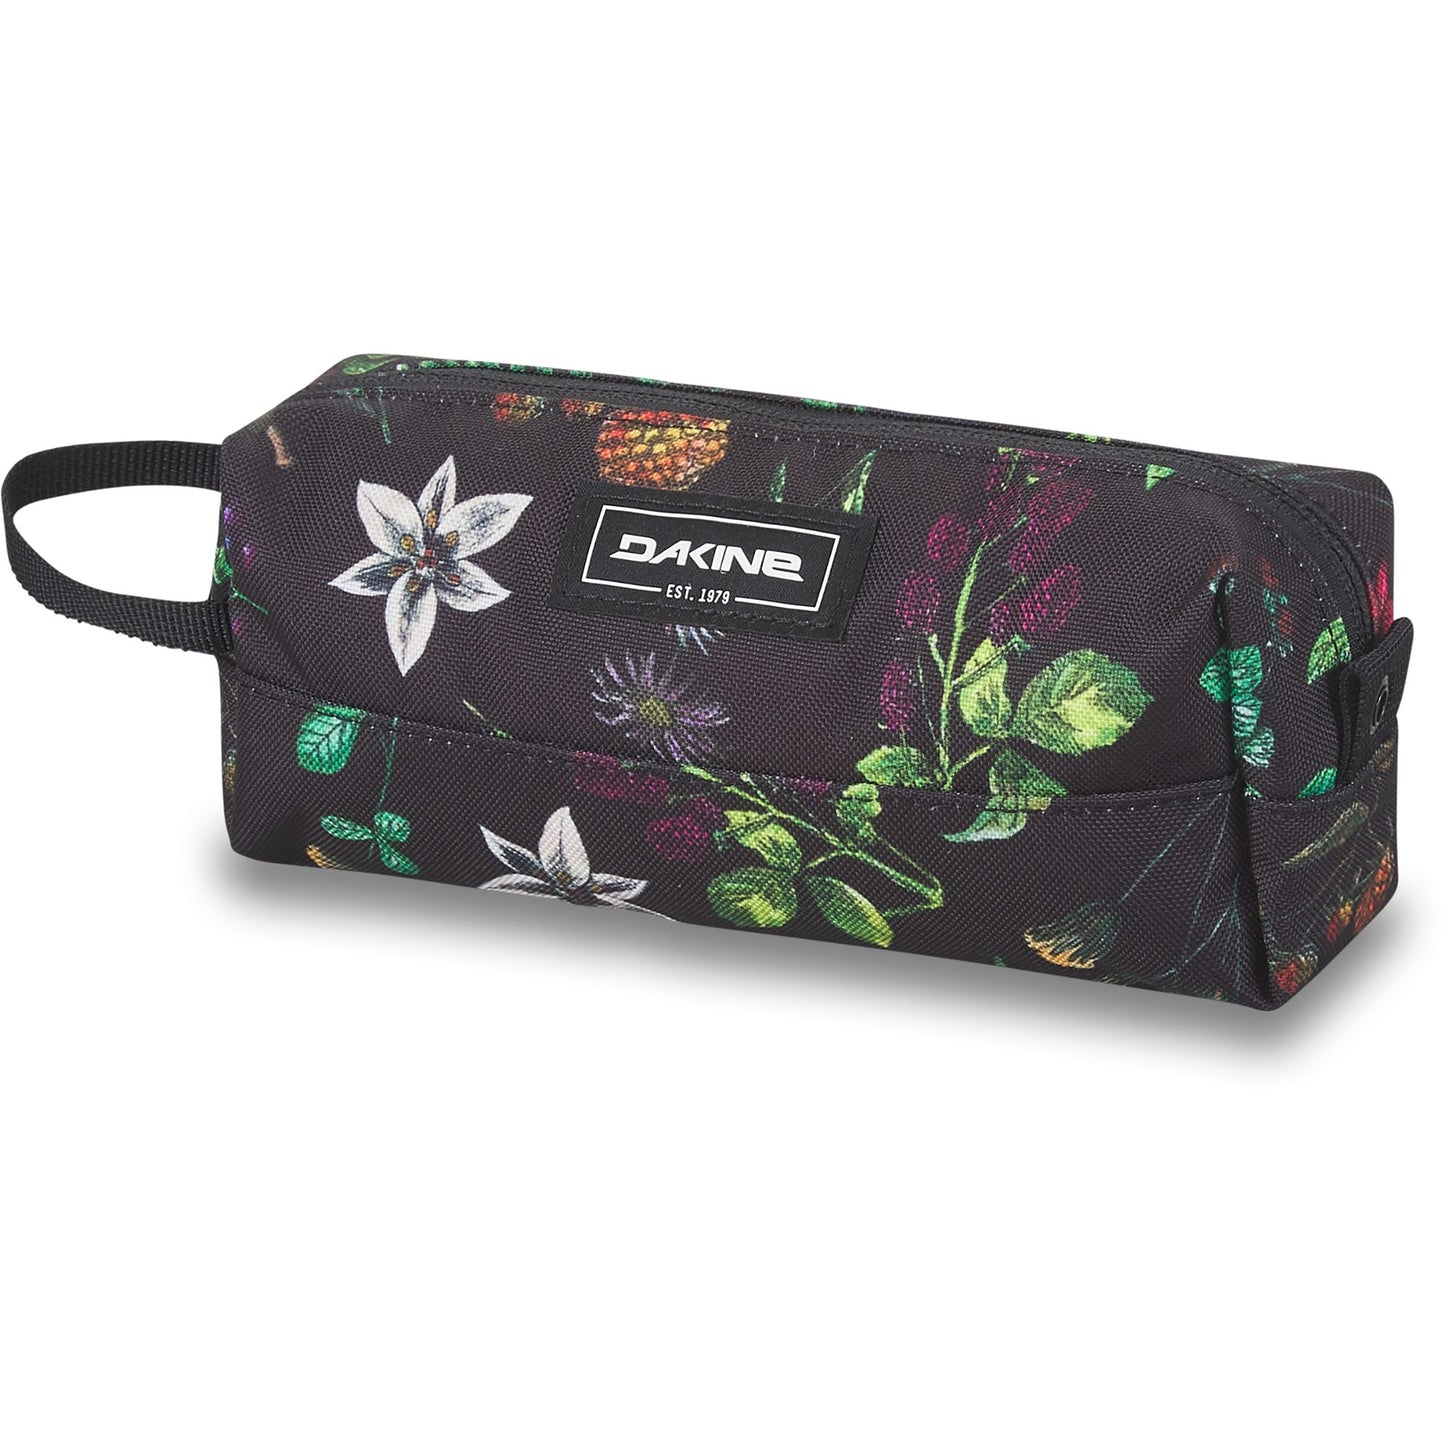 Dakine Accessory Case Woodland Floral OS Bags & Packs